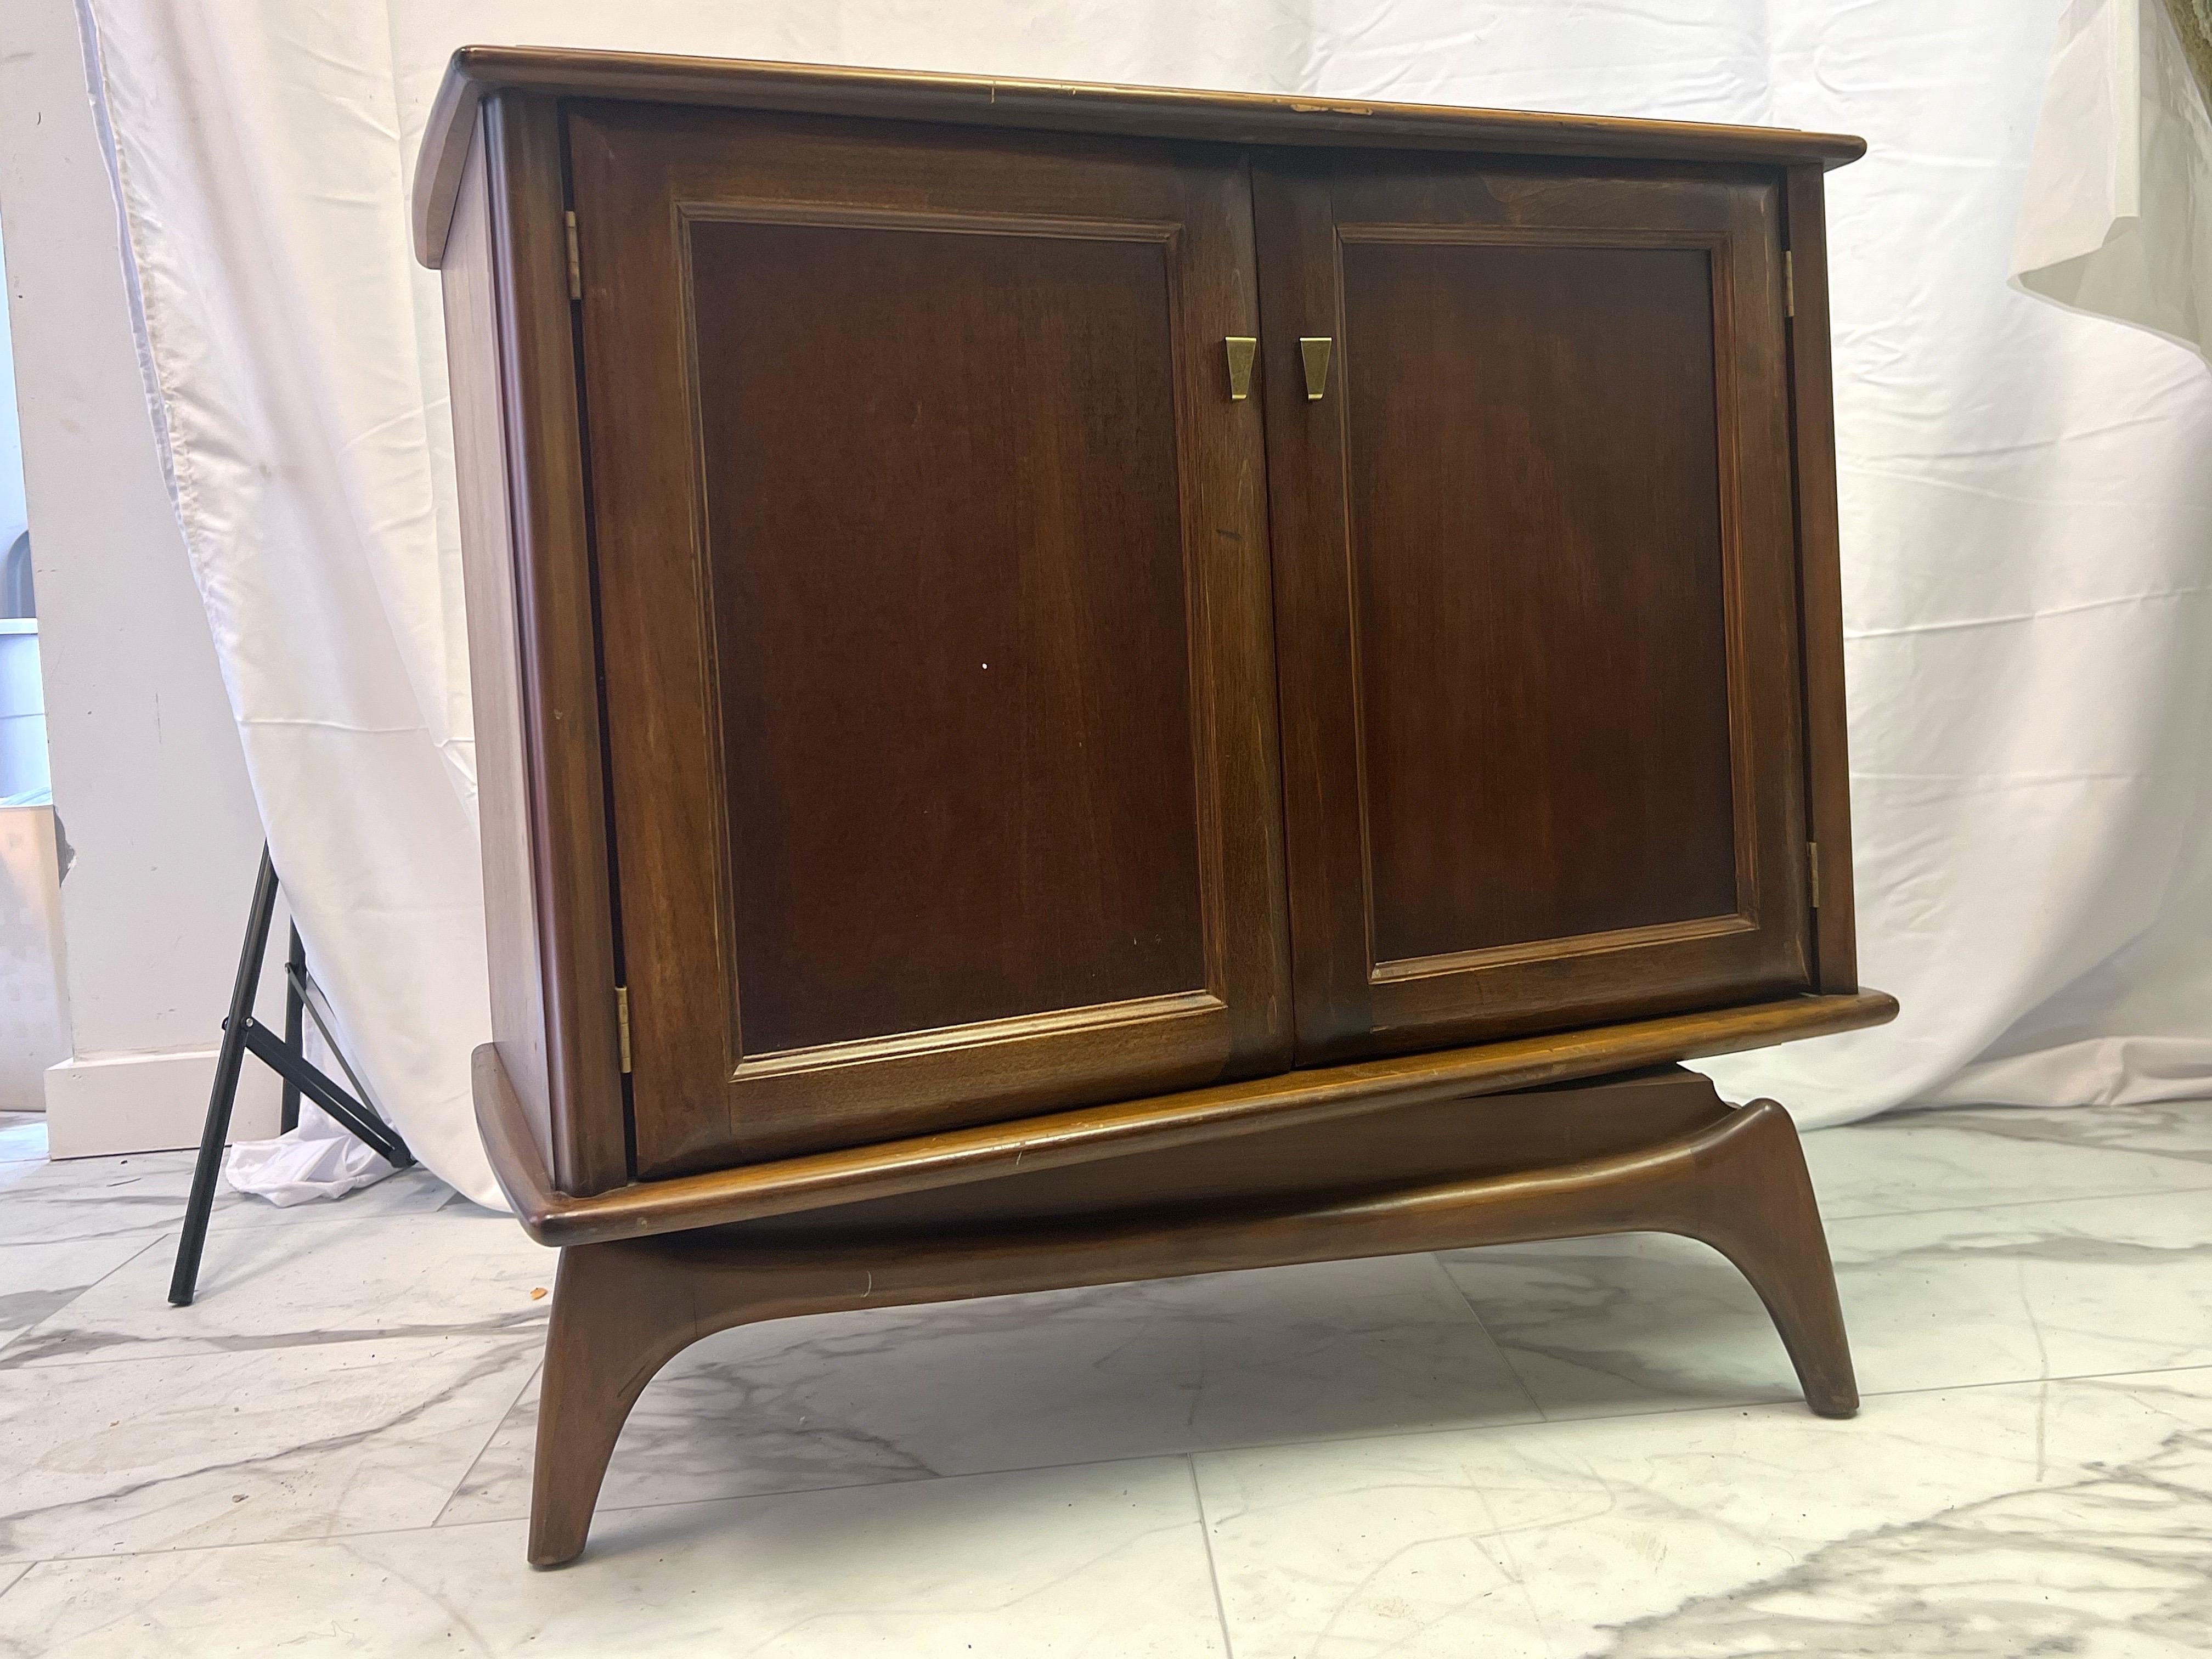 For your consideration I have a solid wood swivel tv cabinet that has been gutted and was used as a more modern tv cabinet equipped with new shelves. The sculpted splayed legs in which this piece swivels on are a perfect addition to your midmod